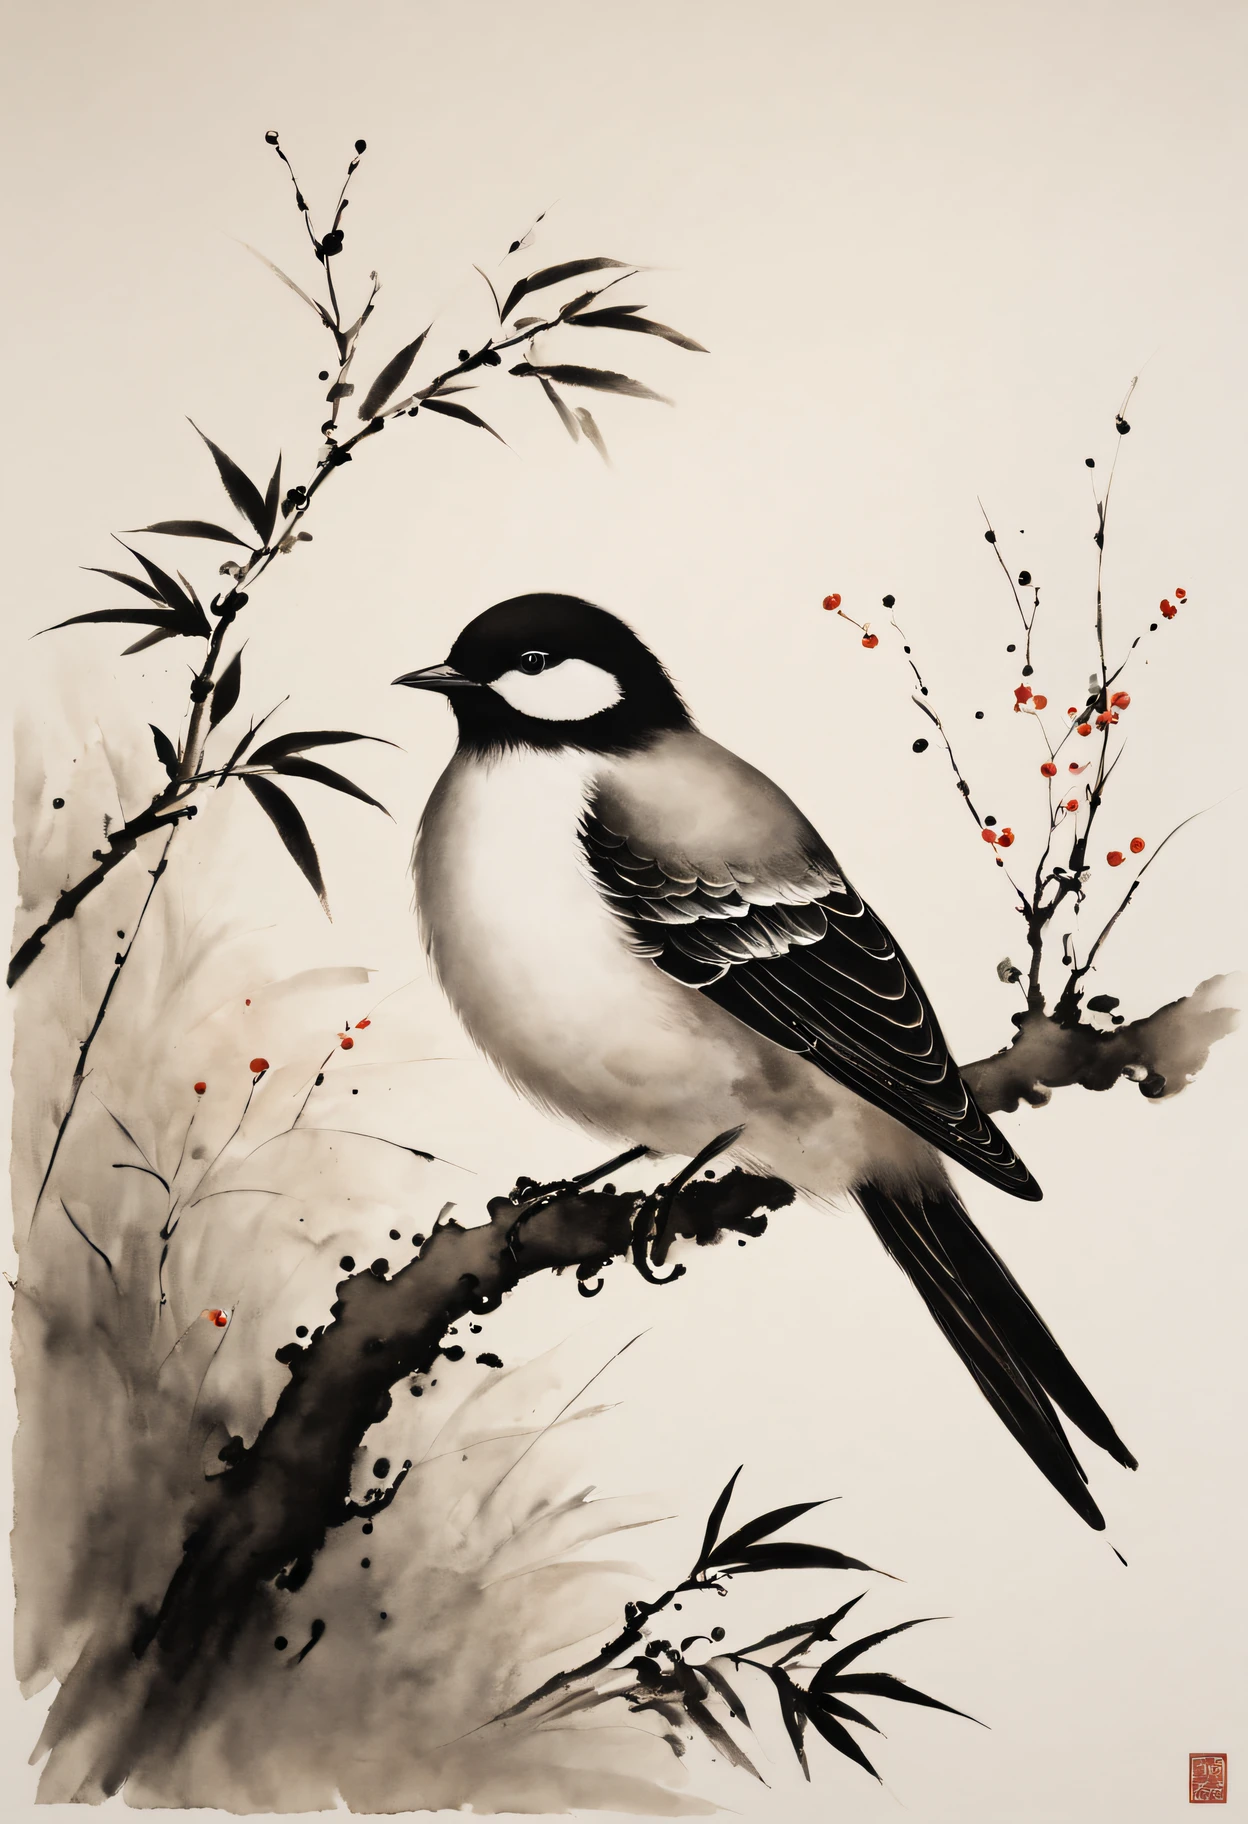 (Best quality at best,A high resolution,tmasterpiece:1.2),ultra - detailed,ink and watercolor painting,maximalist,Chinese,birds in branches,Loose brushstrokes, artworks,subtletextures,Elegant and ,expressive ink,Black and white,Striking,finely detailled,zen feeling,Traditional technology,Artistic interpretation,tranquil ambiance,minimalist aesthetic,Calm atmosphere,full of symbolic meaning,Subtle gradients,harmonious balance,atmosphric perspective,peaceful tranquility,sparse background,Thoughtful touches,Powerful simplicity,Peaceful nature,Balance of positive and negative space,Beautiful movements,Lively brushstrokes,nature harmony,EtherealBeauty,traditional pen and ink techniques,calm expression,artistic minimalism,The tranquility of nature,delicated lines,Fantastical Atmosphere,soothing black ink,Subtle ink,Symbolic imagery